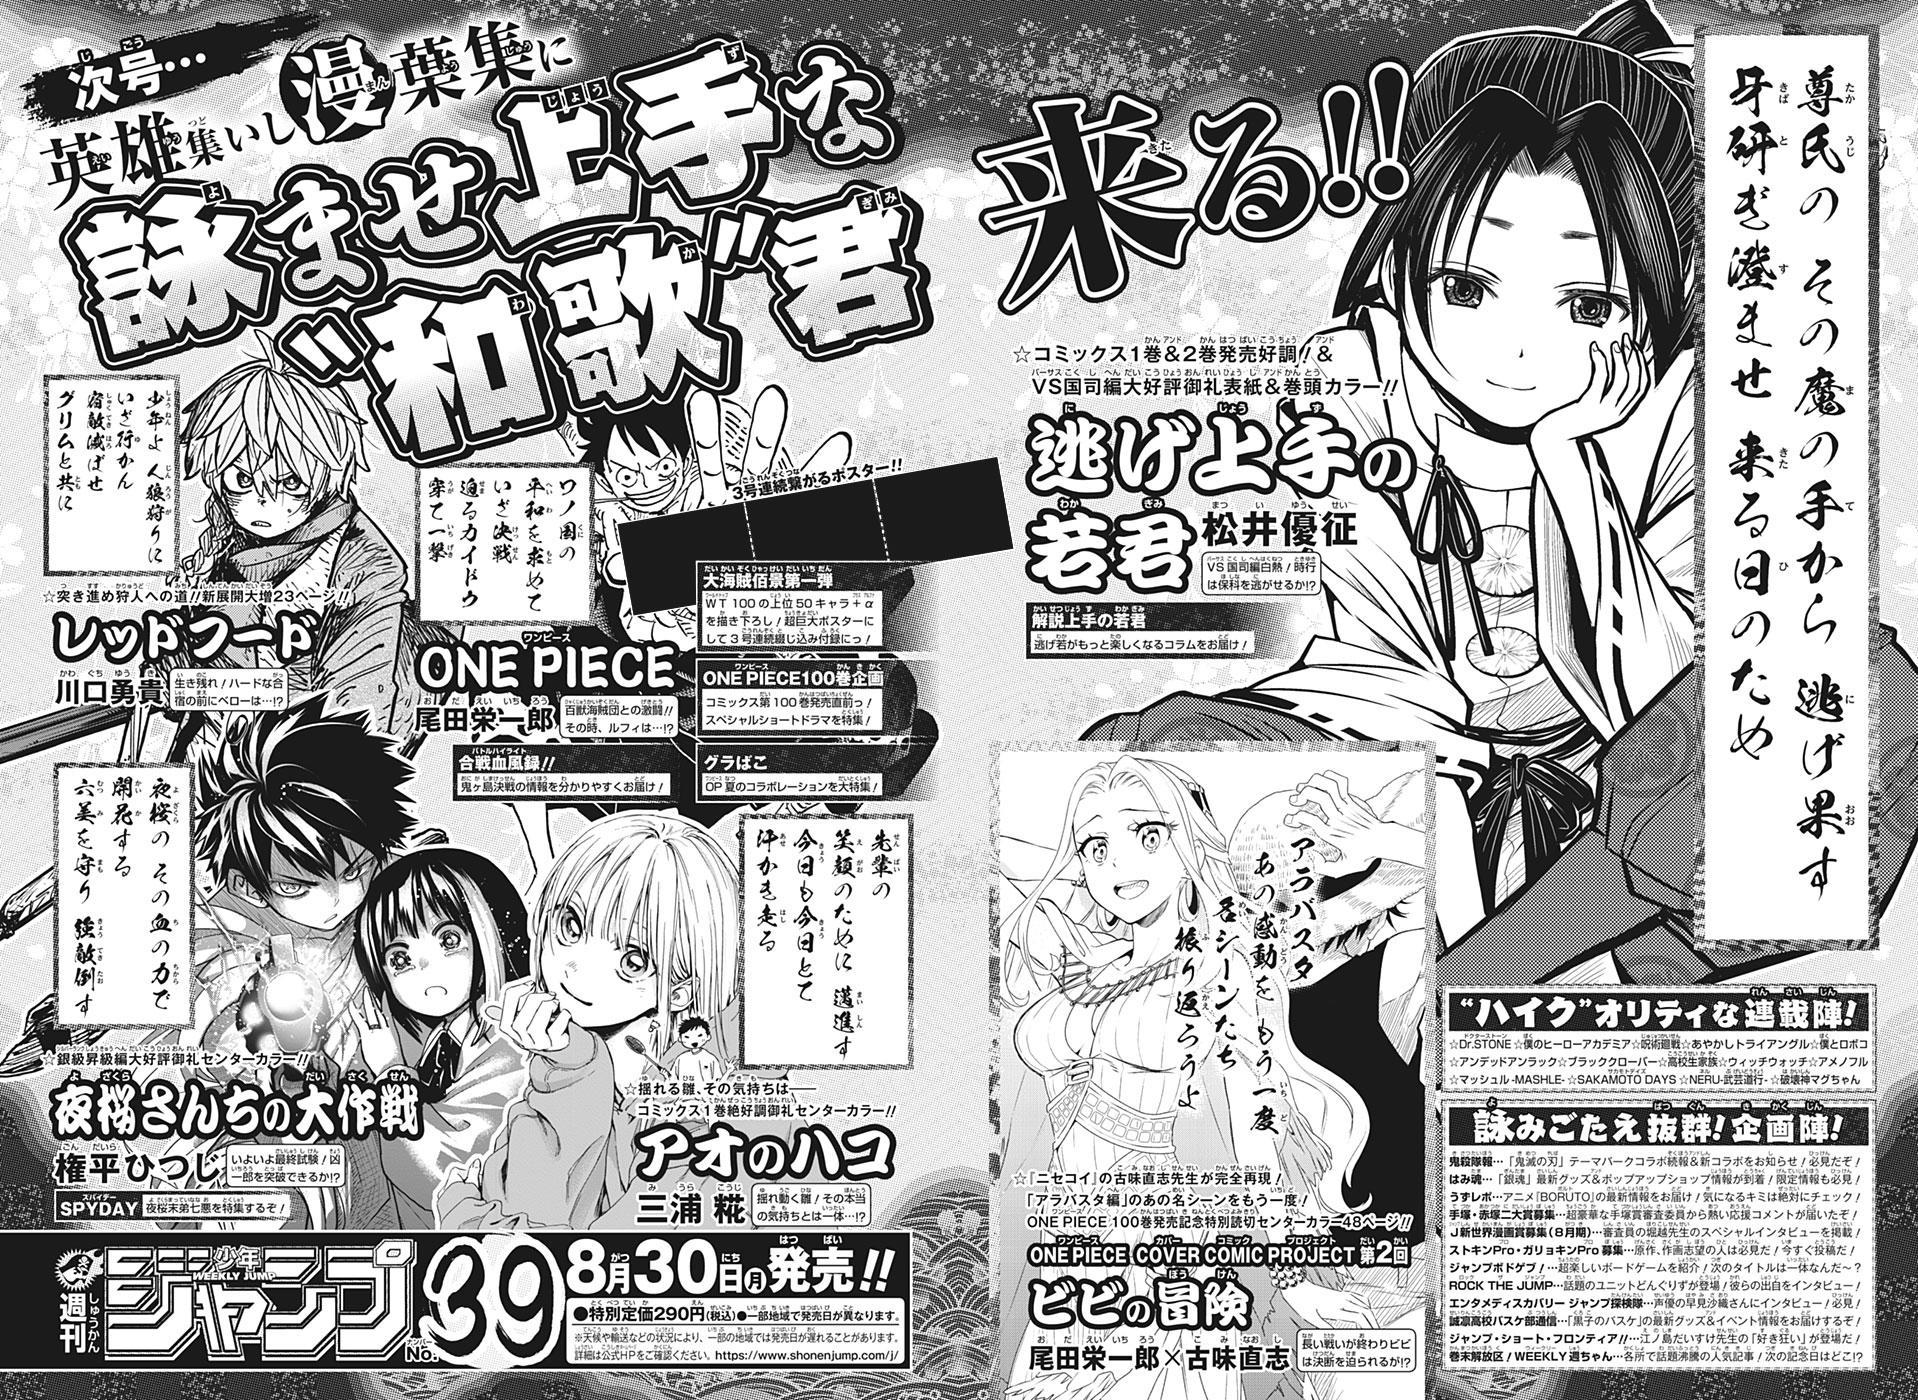 Mag Talk Weekly Shonen Jump 21 Discussion And Toc Talk Page 458 Mangahelpers